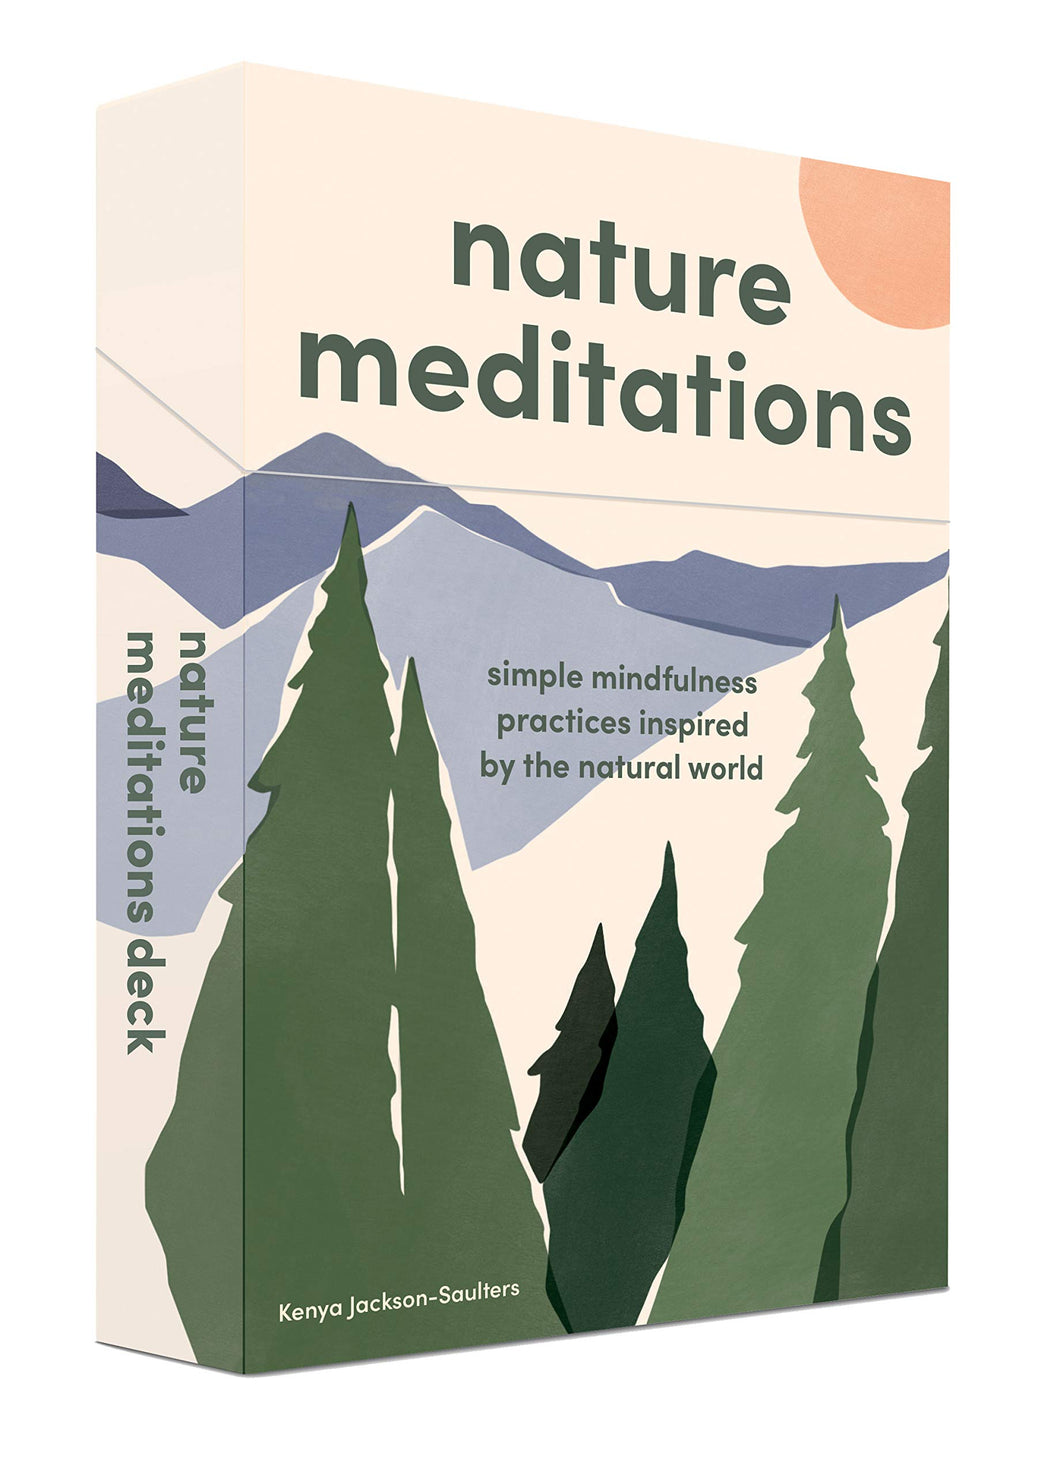 Nature Meditations Deck: Simple Mindfulness Practices Inspired by the Natural World [Kenya Jackson-Saulters]